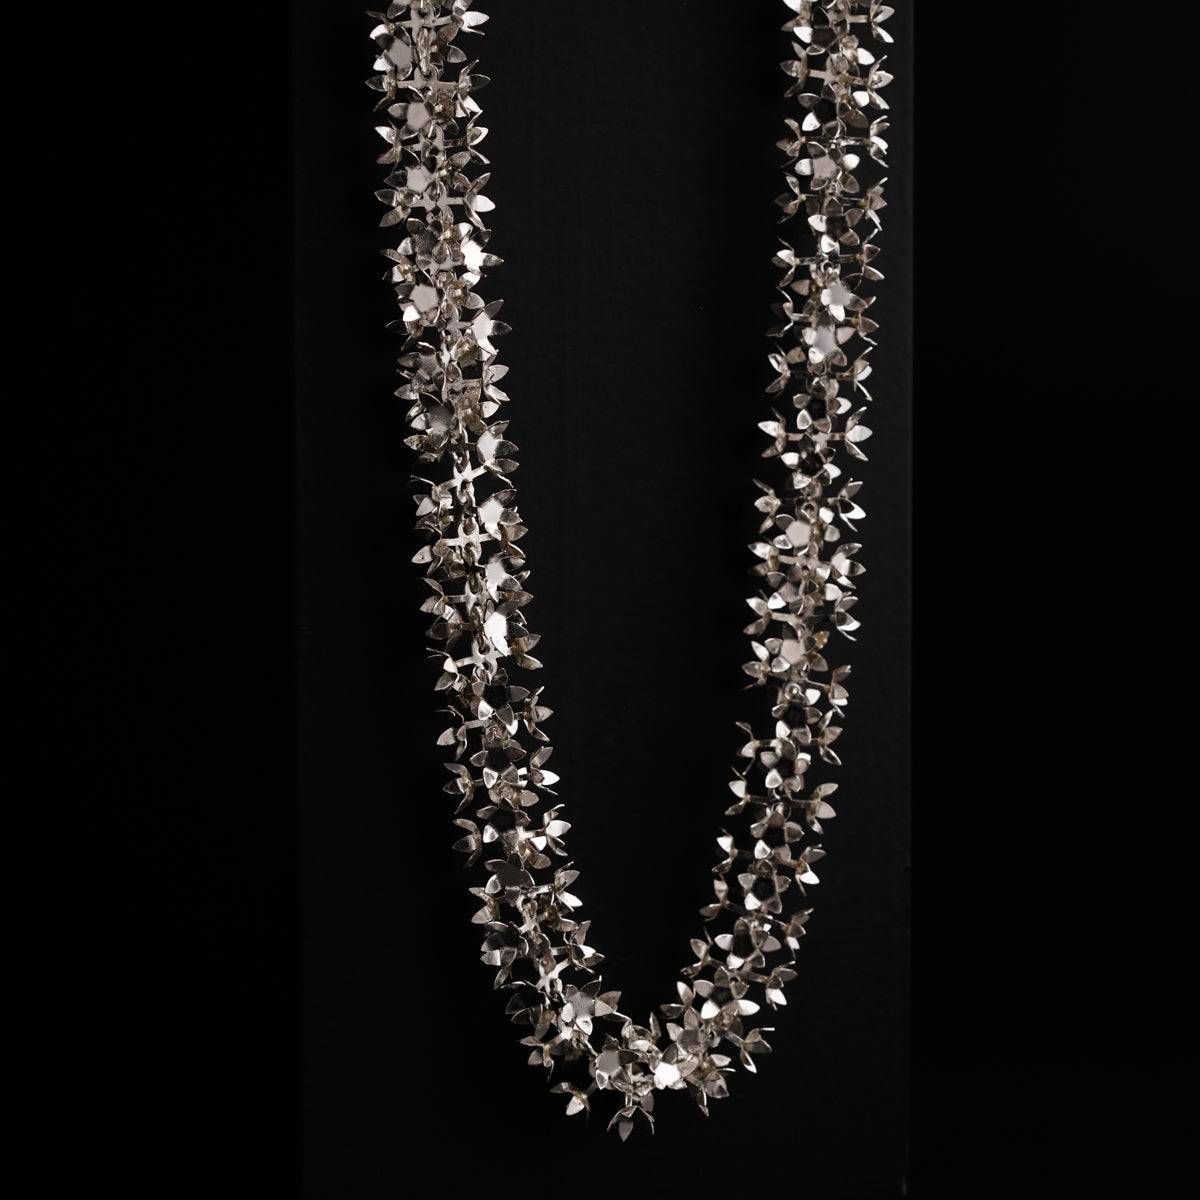 a long necklace with silver beads on a black background